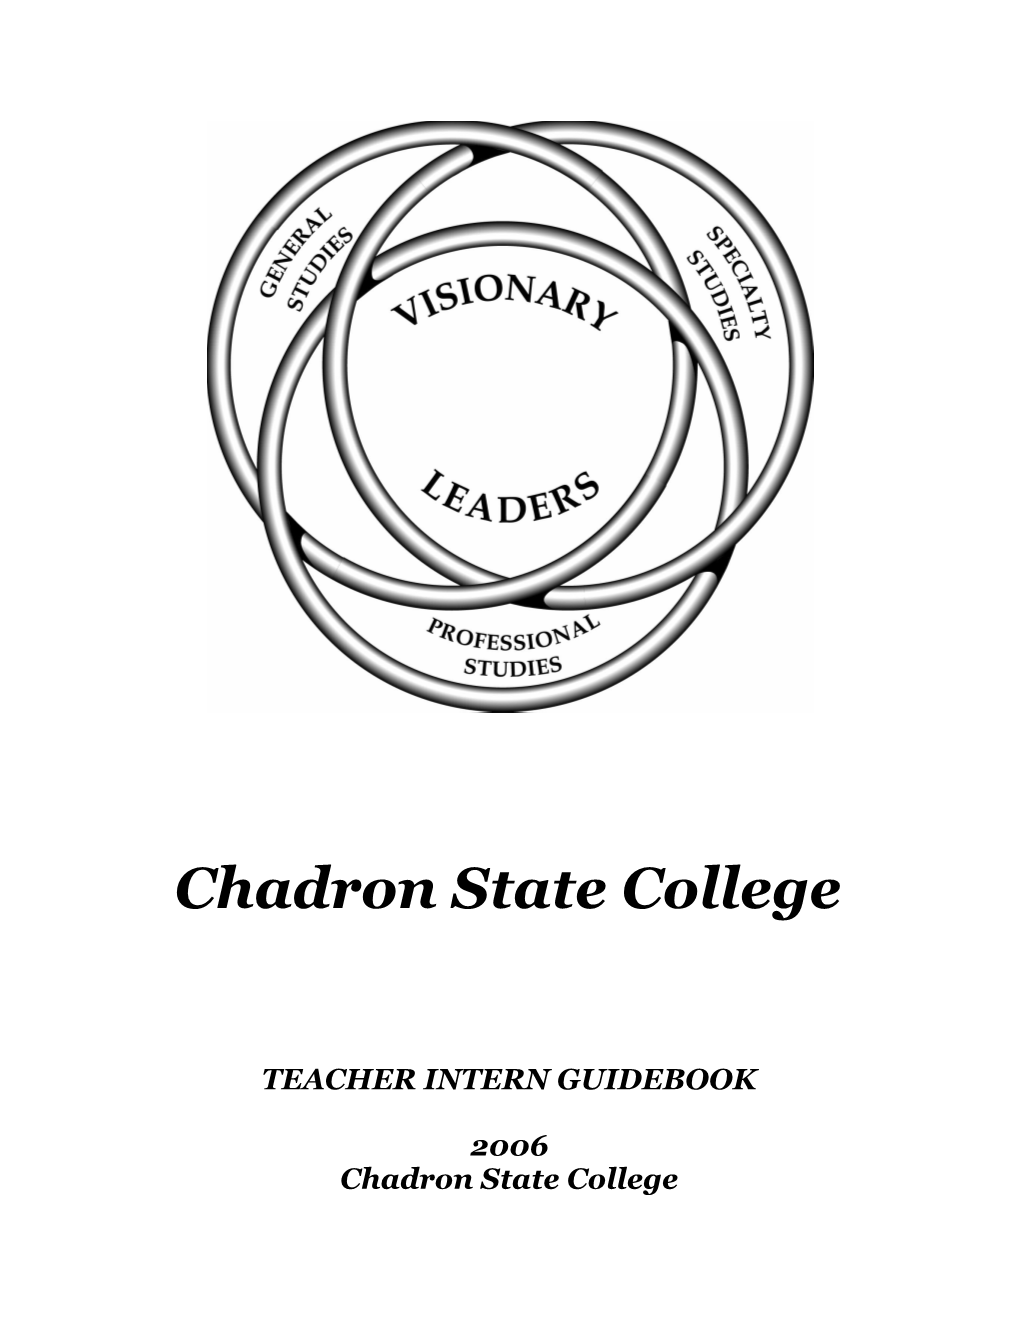 Chadronstate College